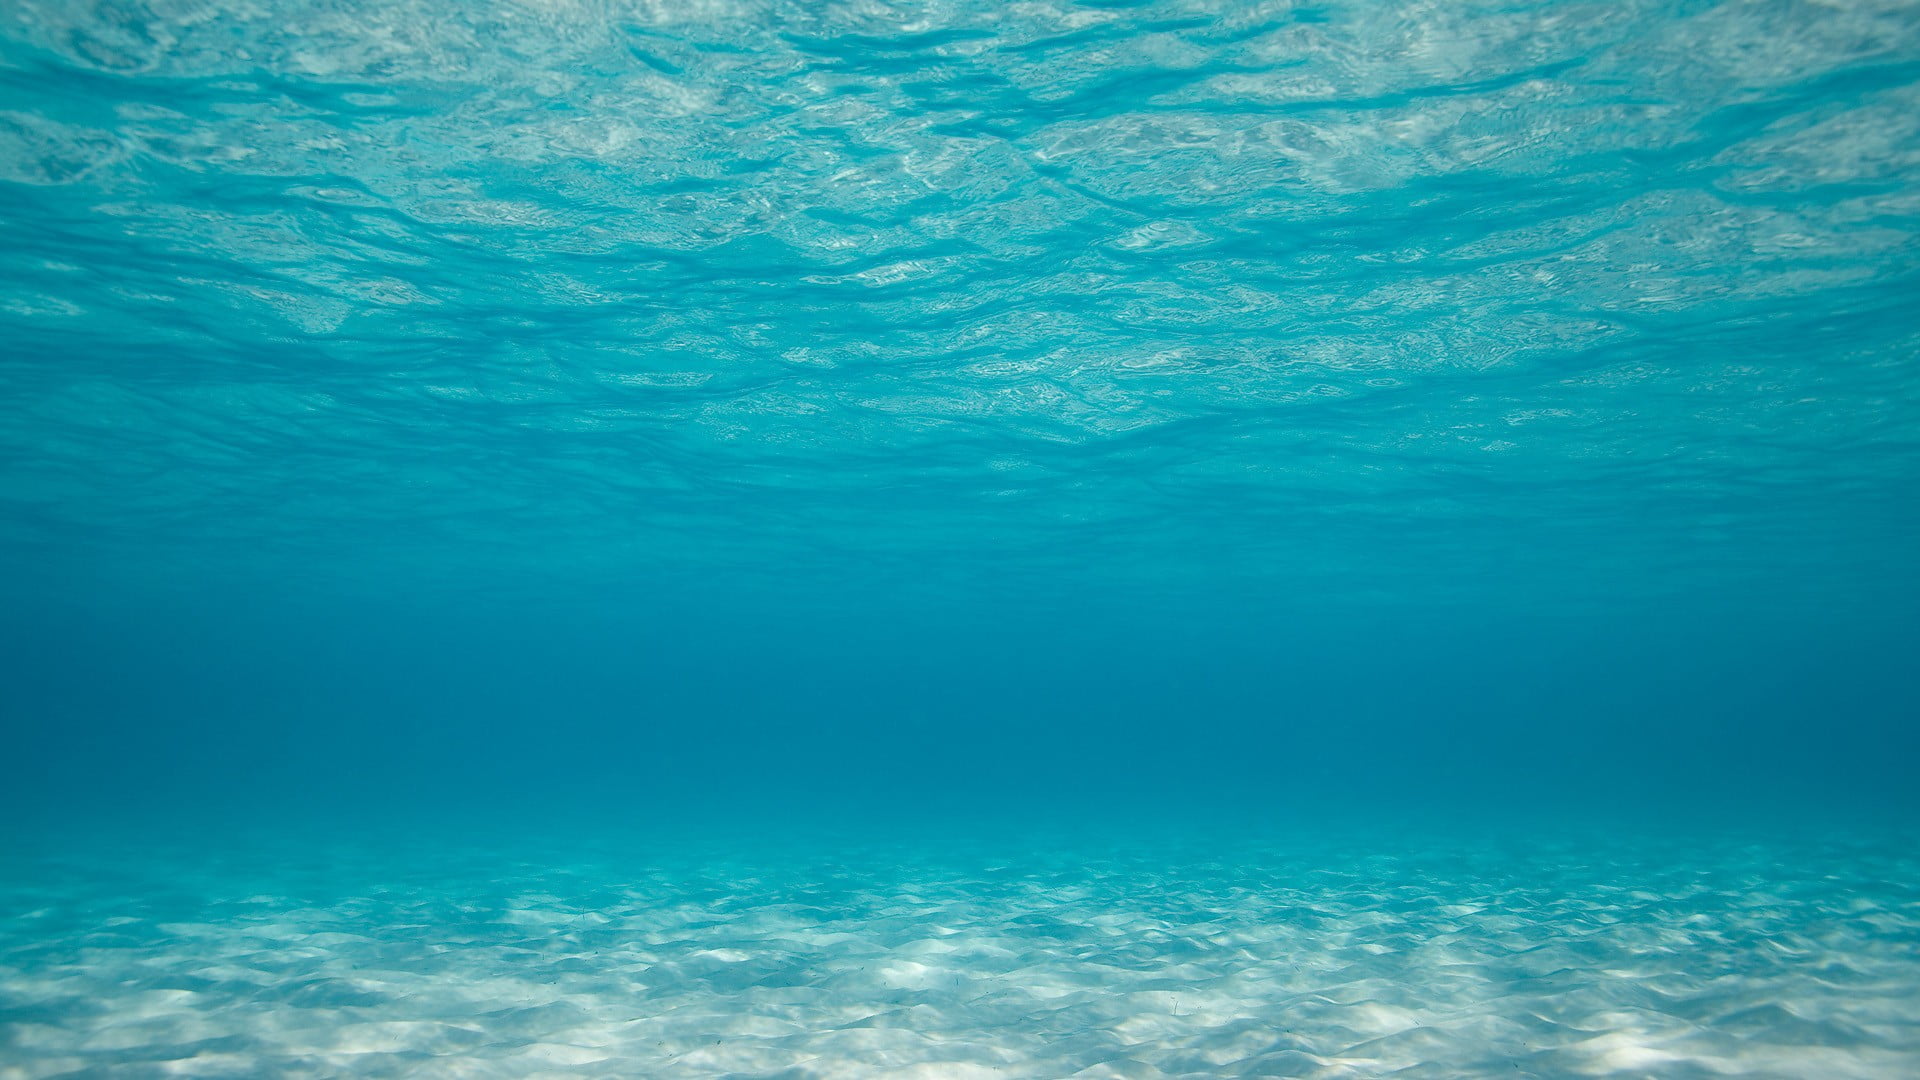 rippling body of water, photography, sea, underwater, blue, turquoise colored